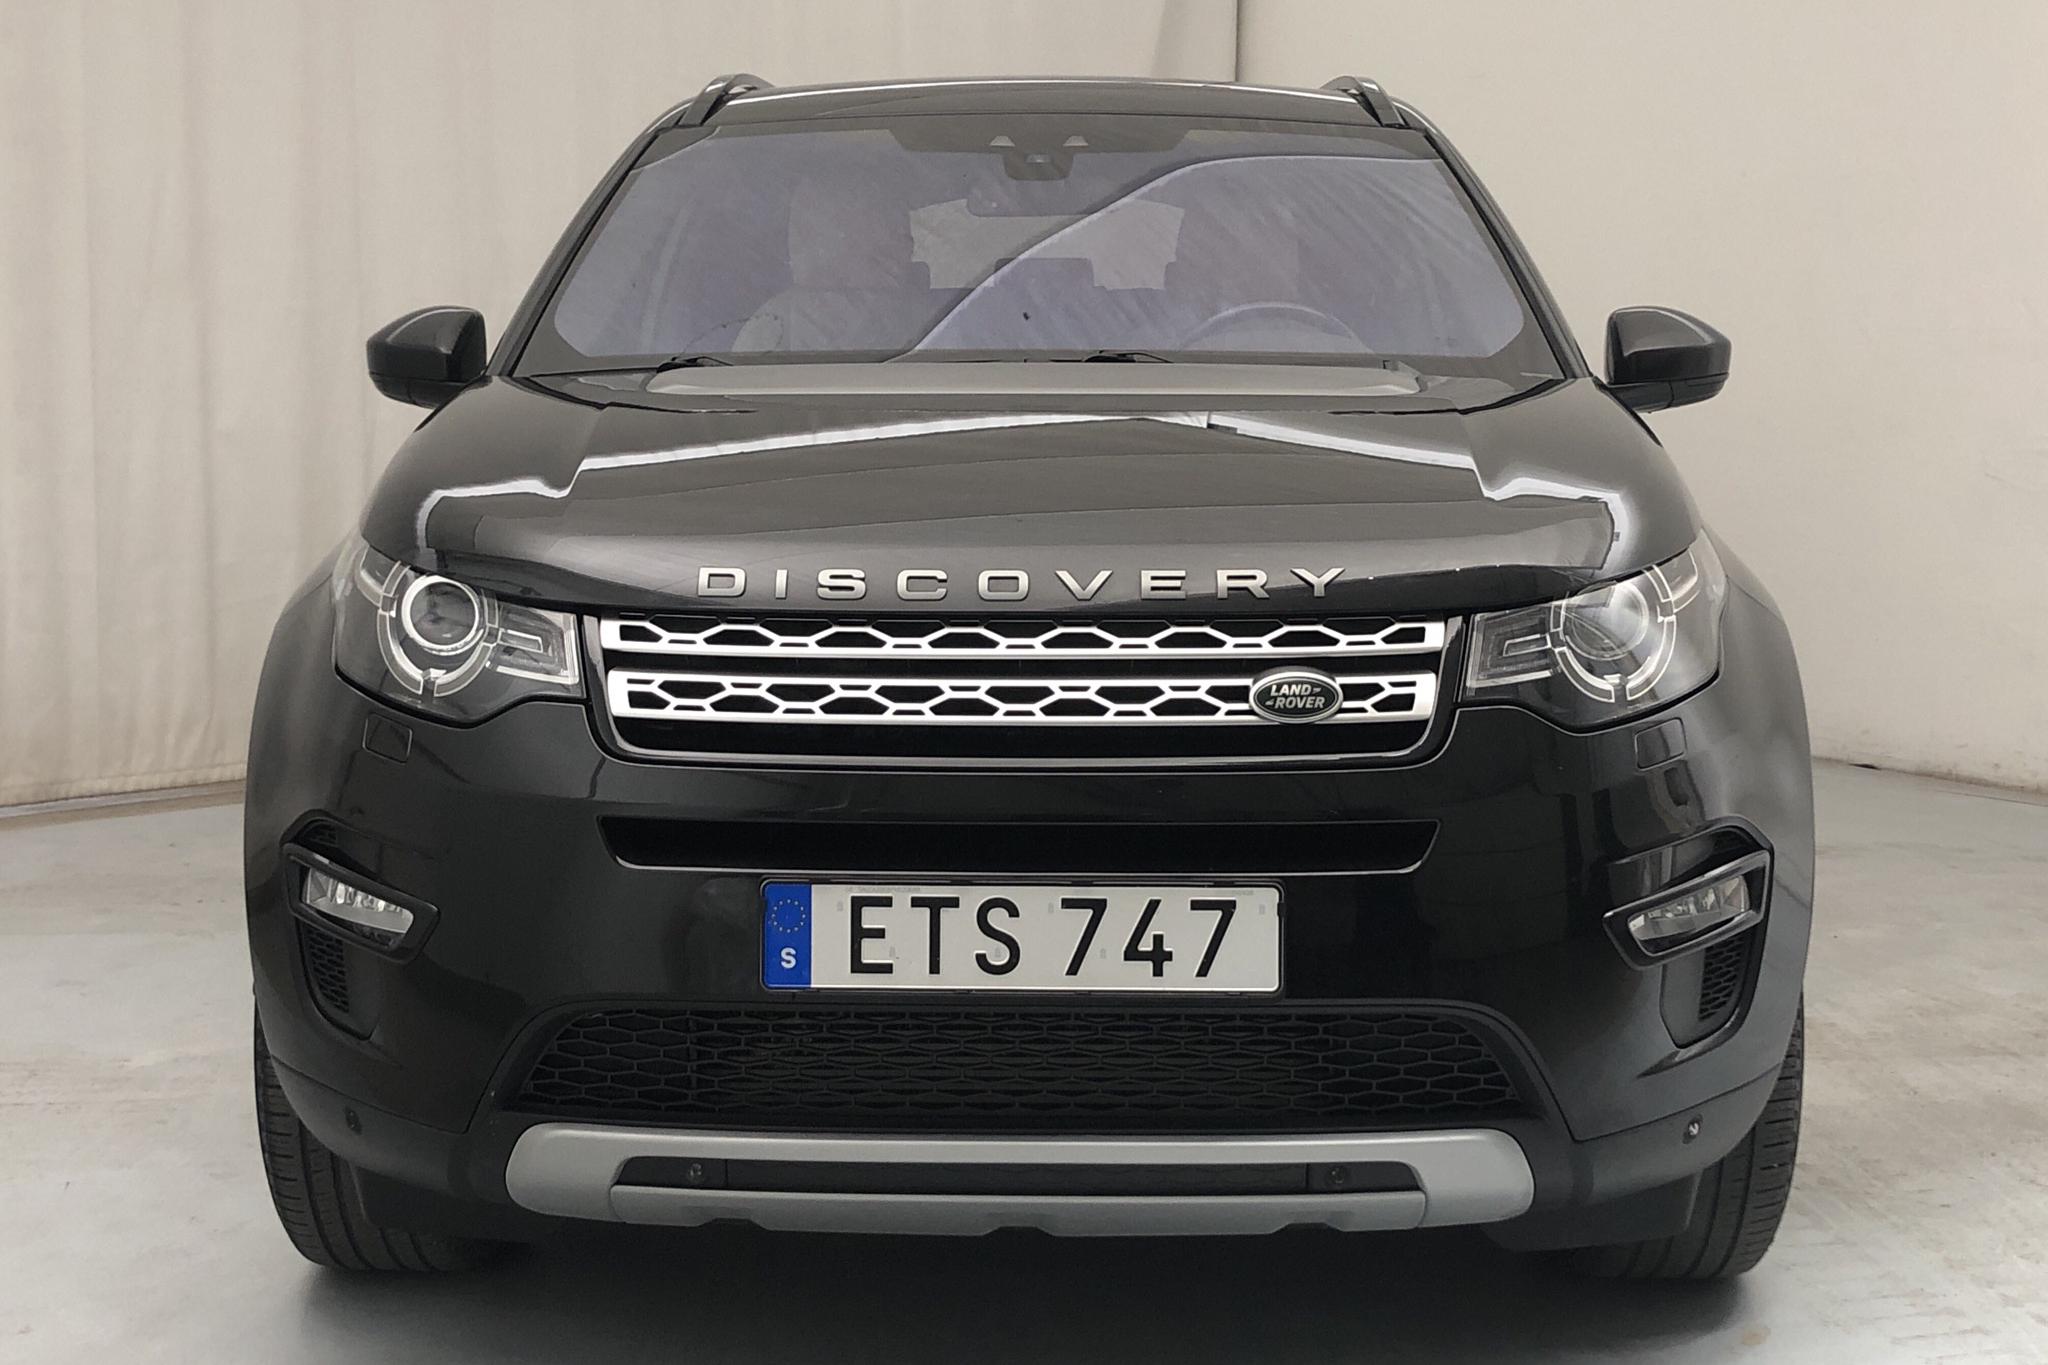 Land Rover Discovery Sport 2.2 TD4 (190hk) - 131 580 km - Automatic - black - 2015